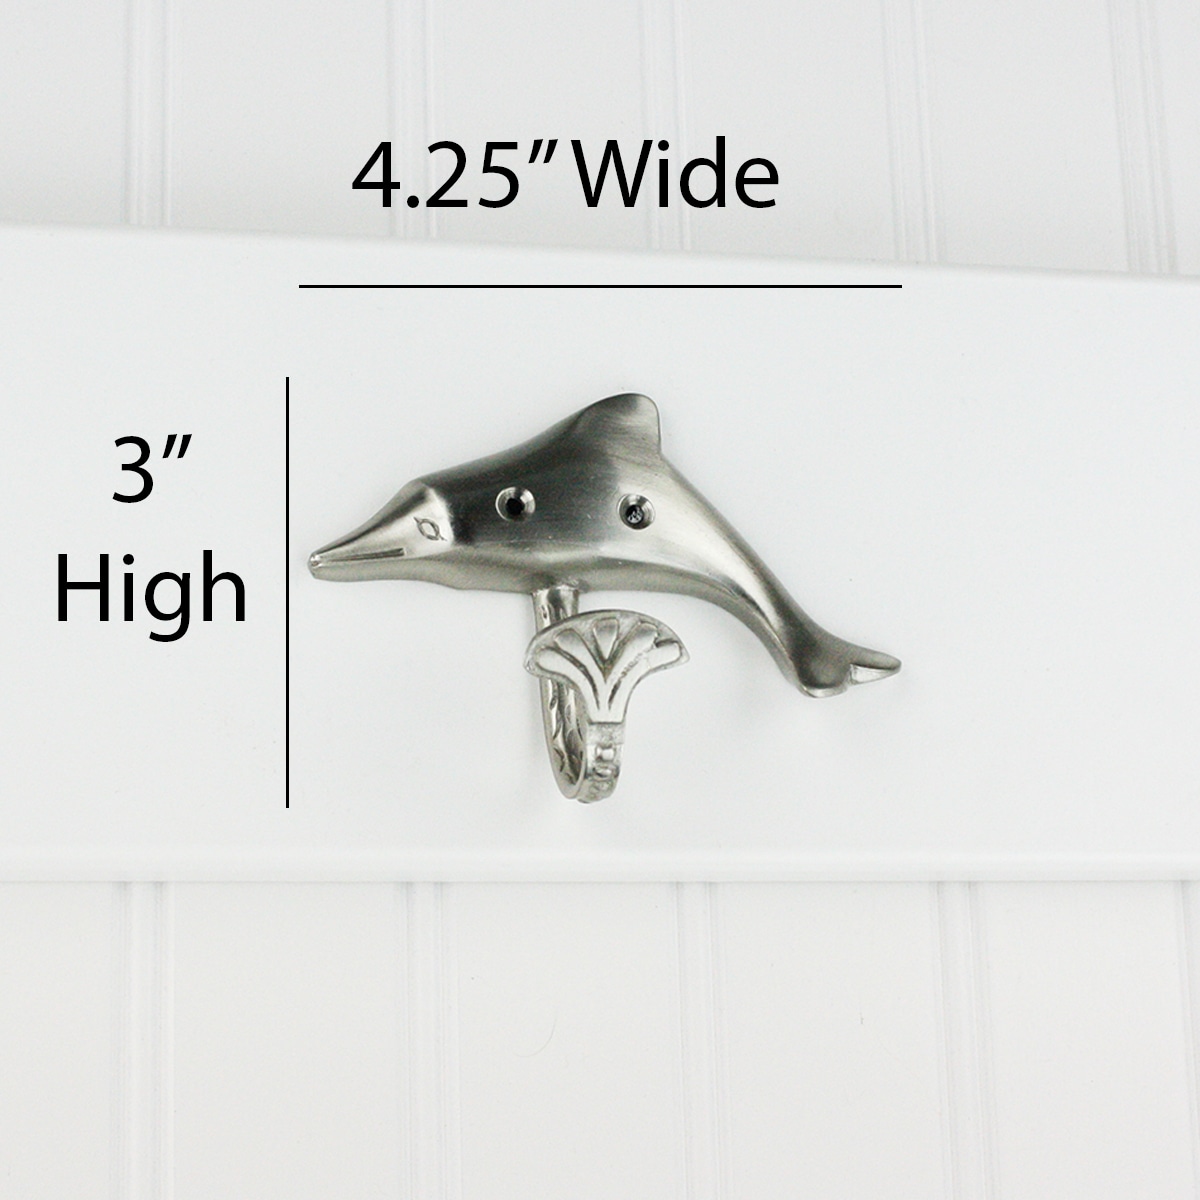 HIGHPOINT Hook Latch with Screws - Small - Nickel Finish